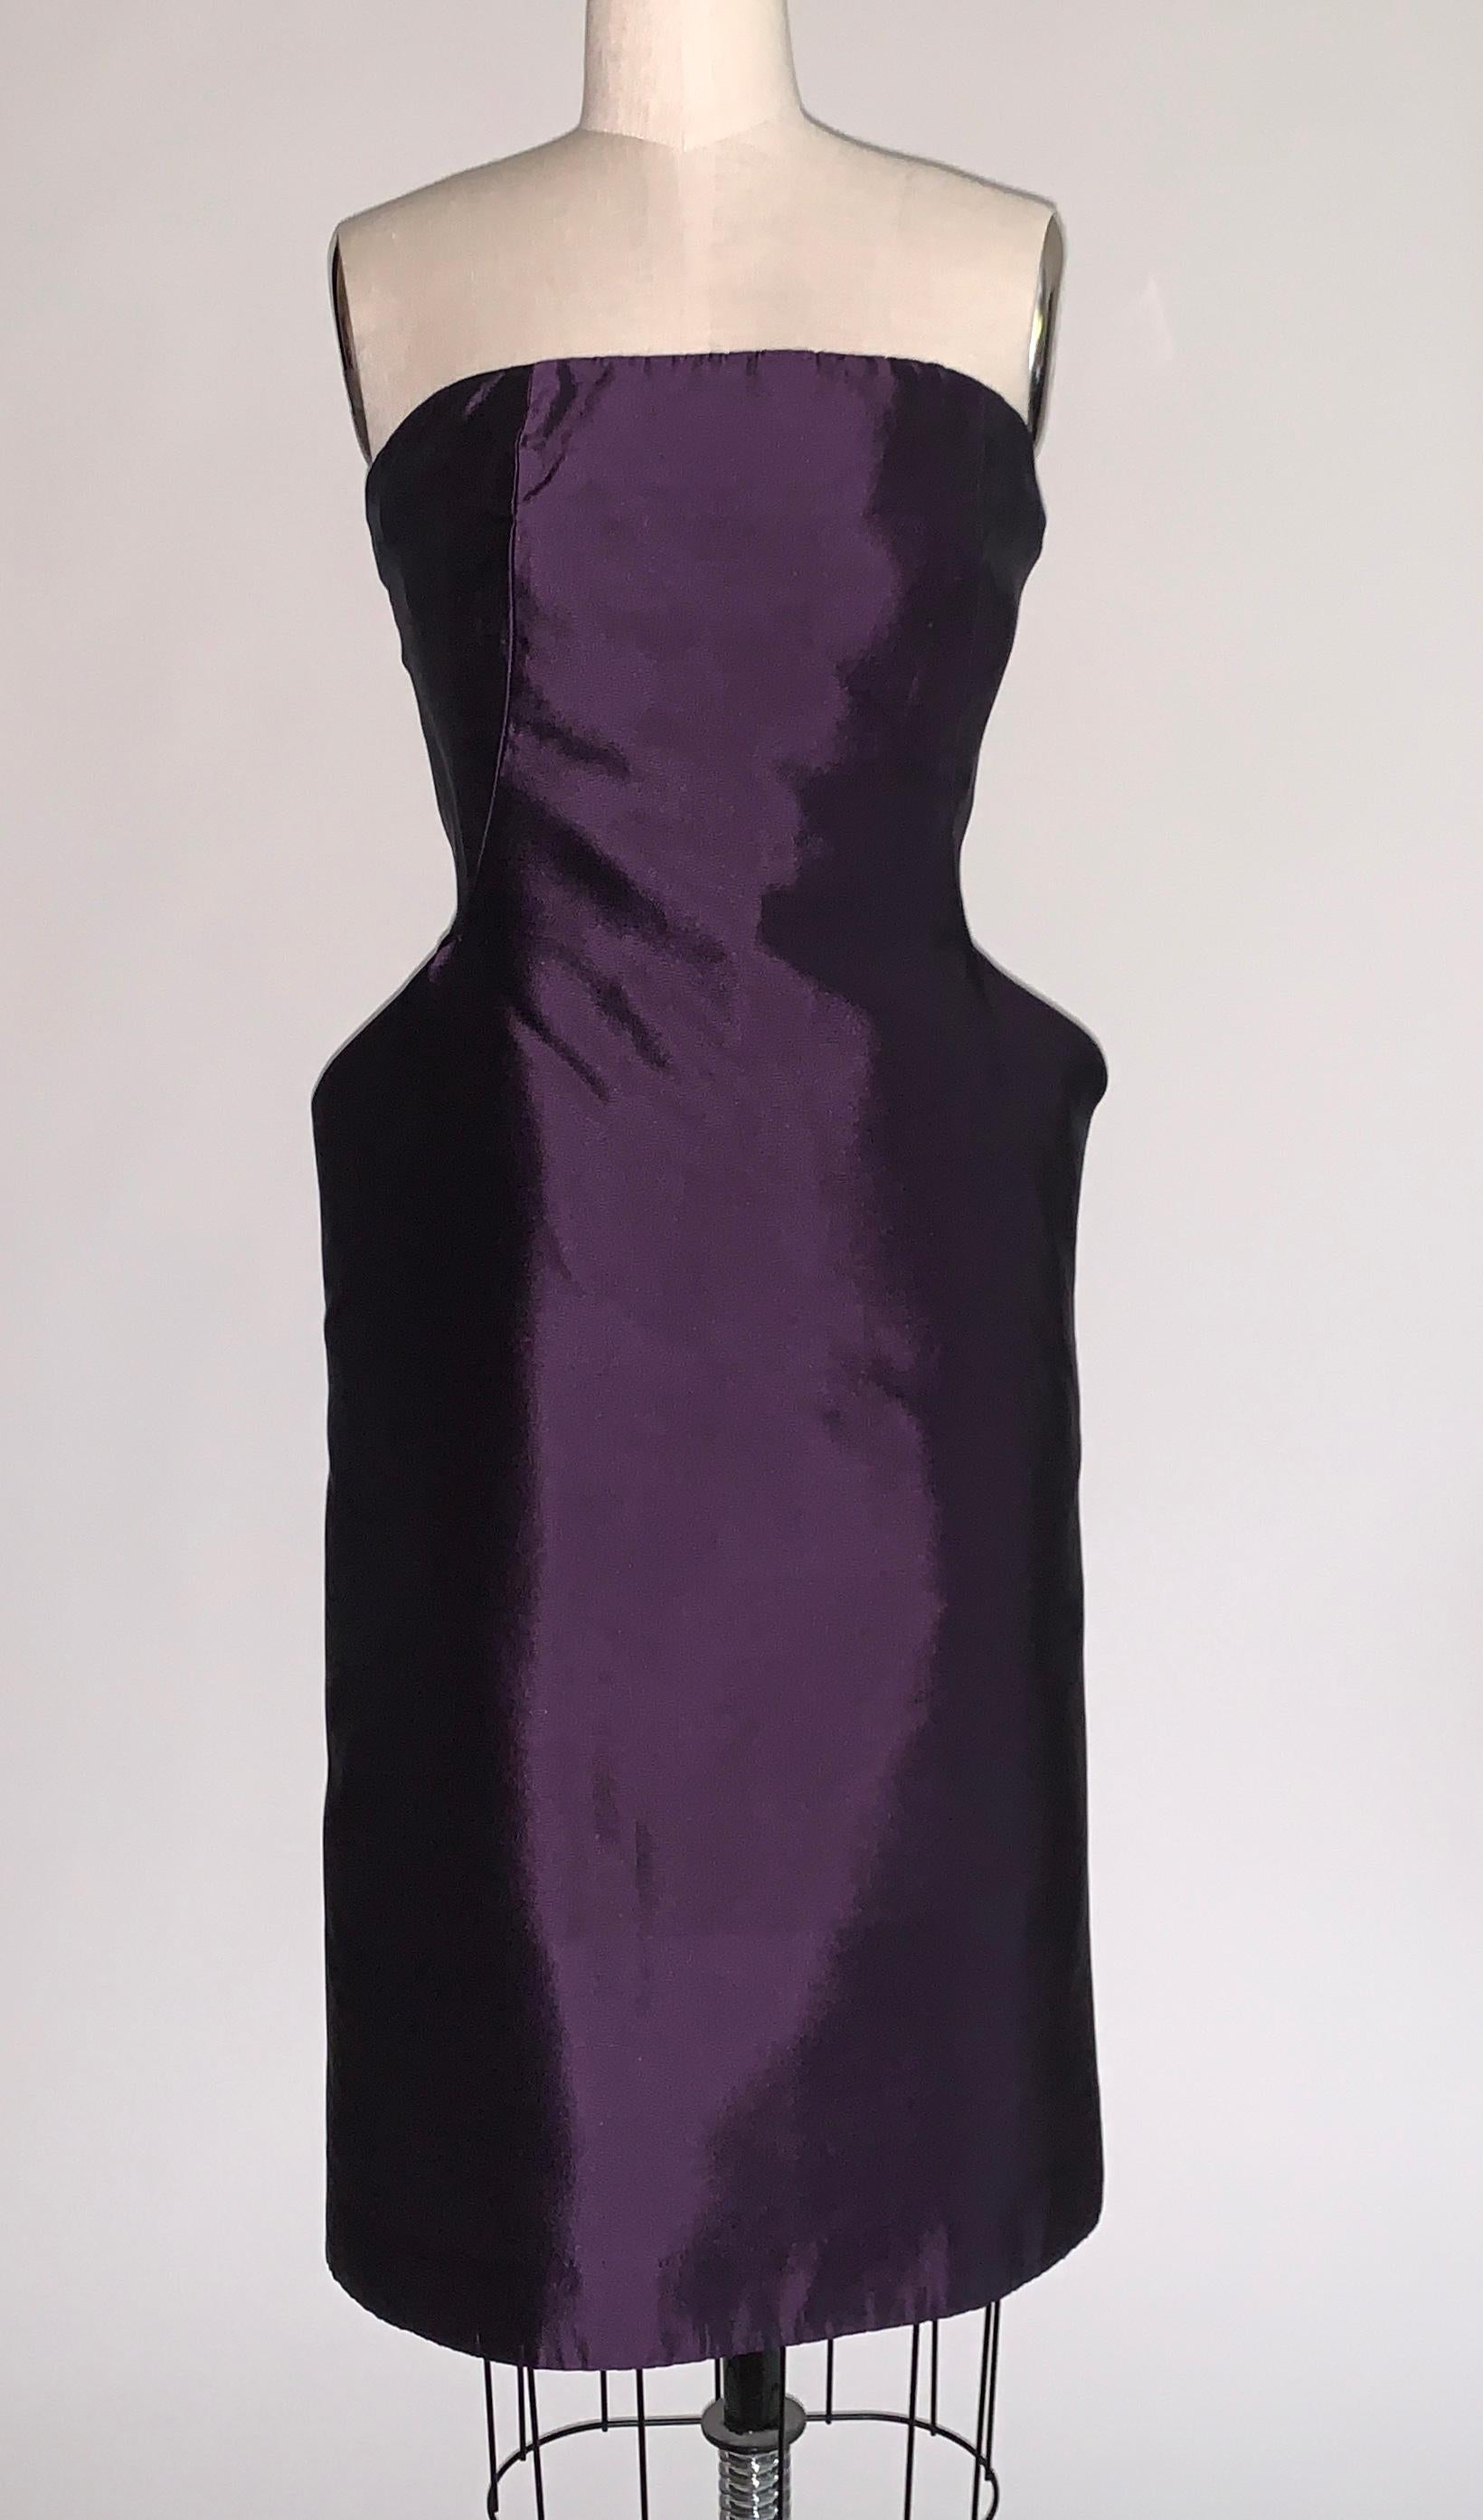 Alexander McQueen purple silk strapless dress with amazing sculptural pockets that flare at hip, giving a dramatic silhouette. Built in bustier/corseting create an even more stunning shape. Back zip and hook and eye. From the Fall 2007 collection,